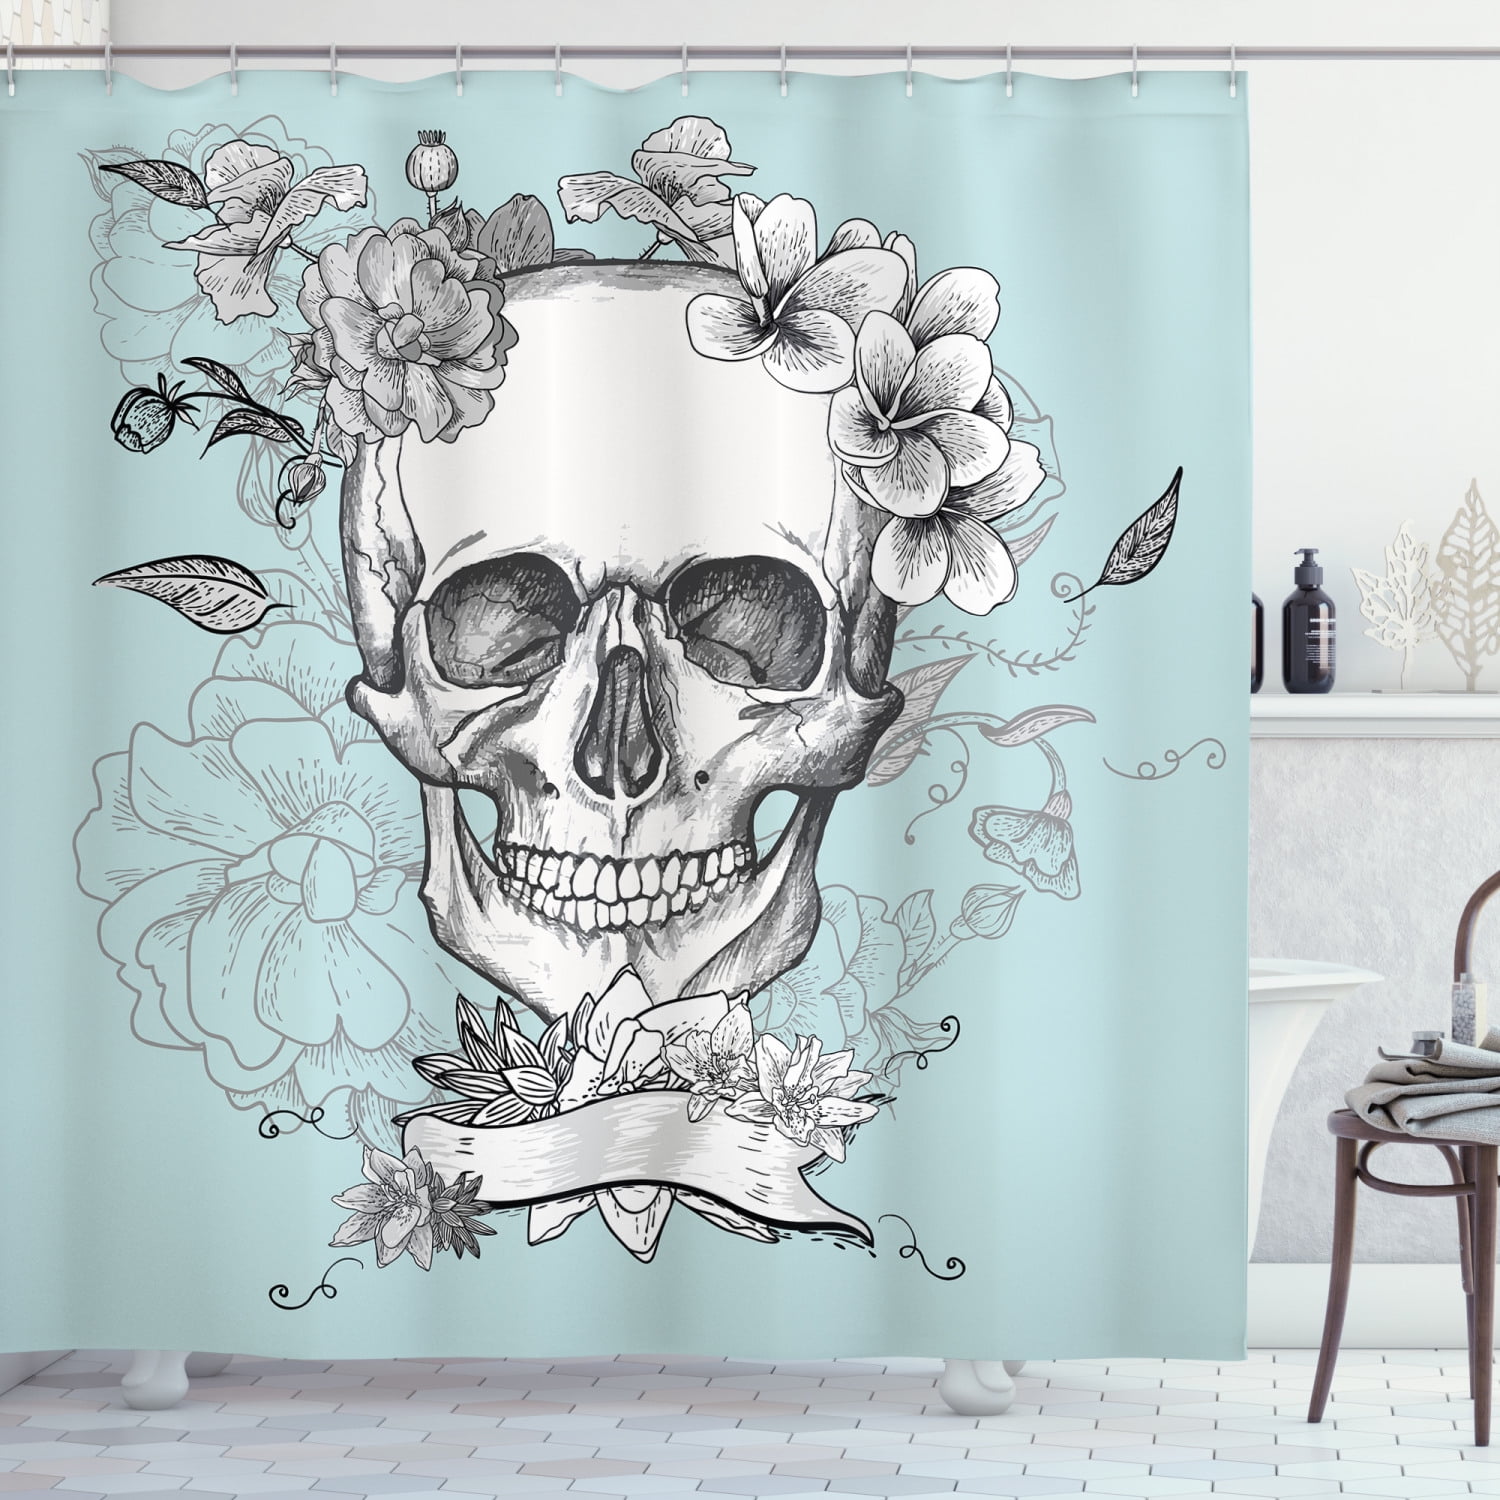 72X72" Funny Floral Skull Shower Curtain With Beard Waterproof Fabric Polyester 